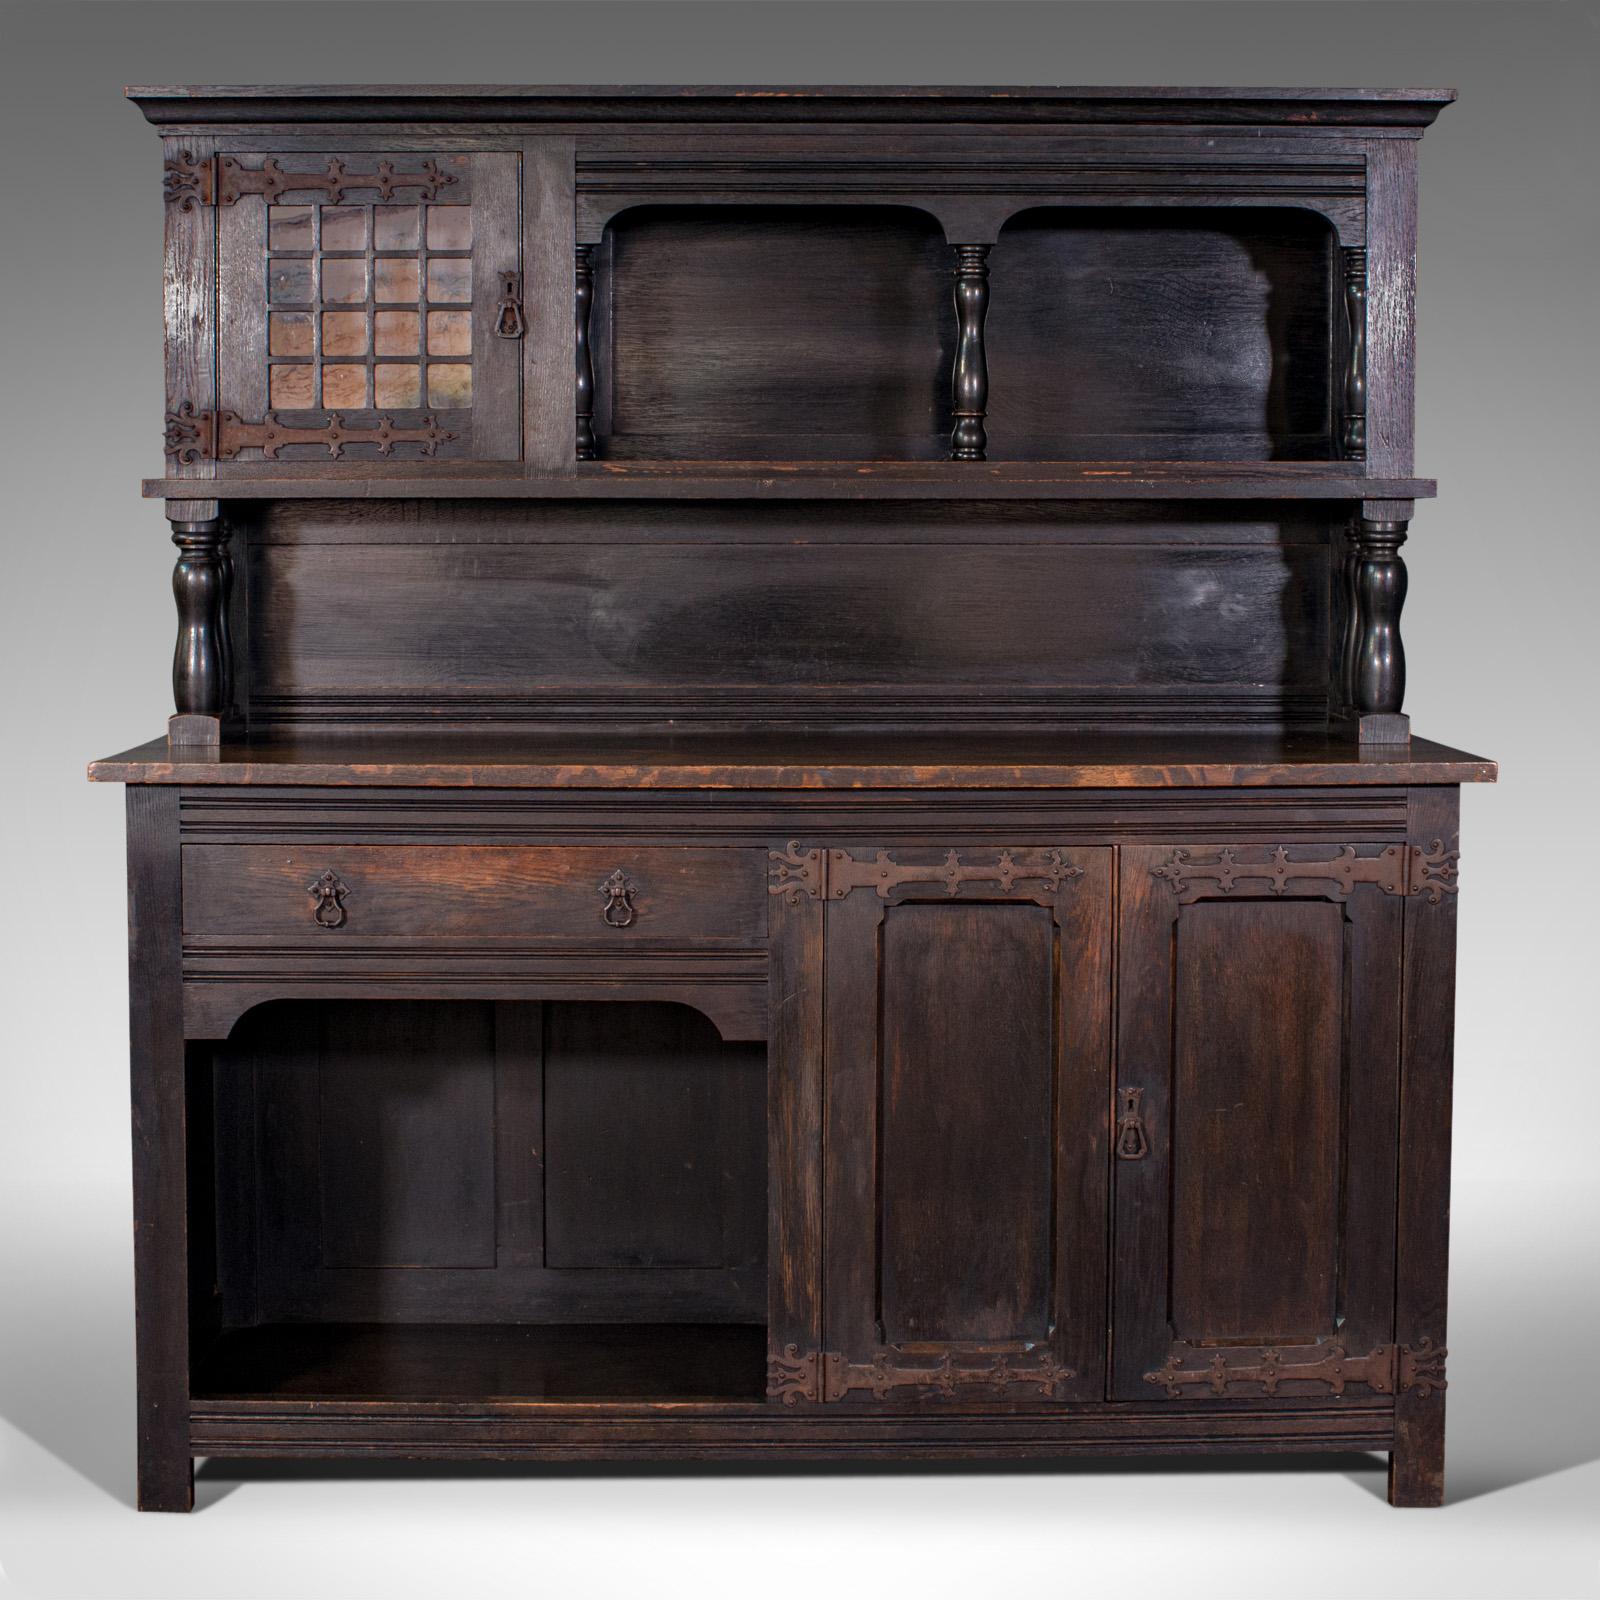 This is a large antique housekeeper's cabinet. An English, oak dresser or sideboard displaying Arts and Crafts taste in the manner of Liberty & Co, dating to the Edwardian period, circa 1910.

Impressive example of the Arts & Crafts movement of